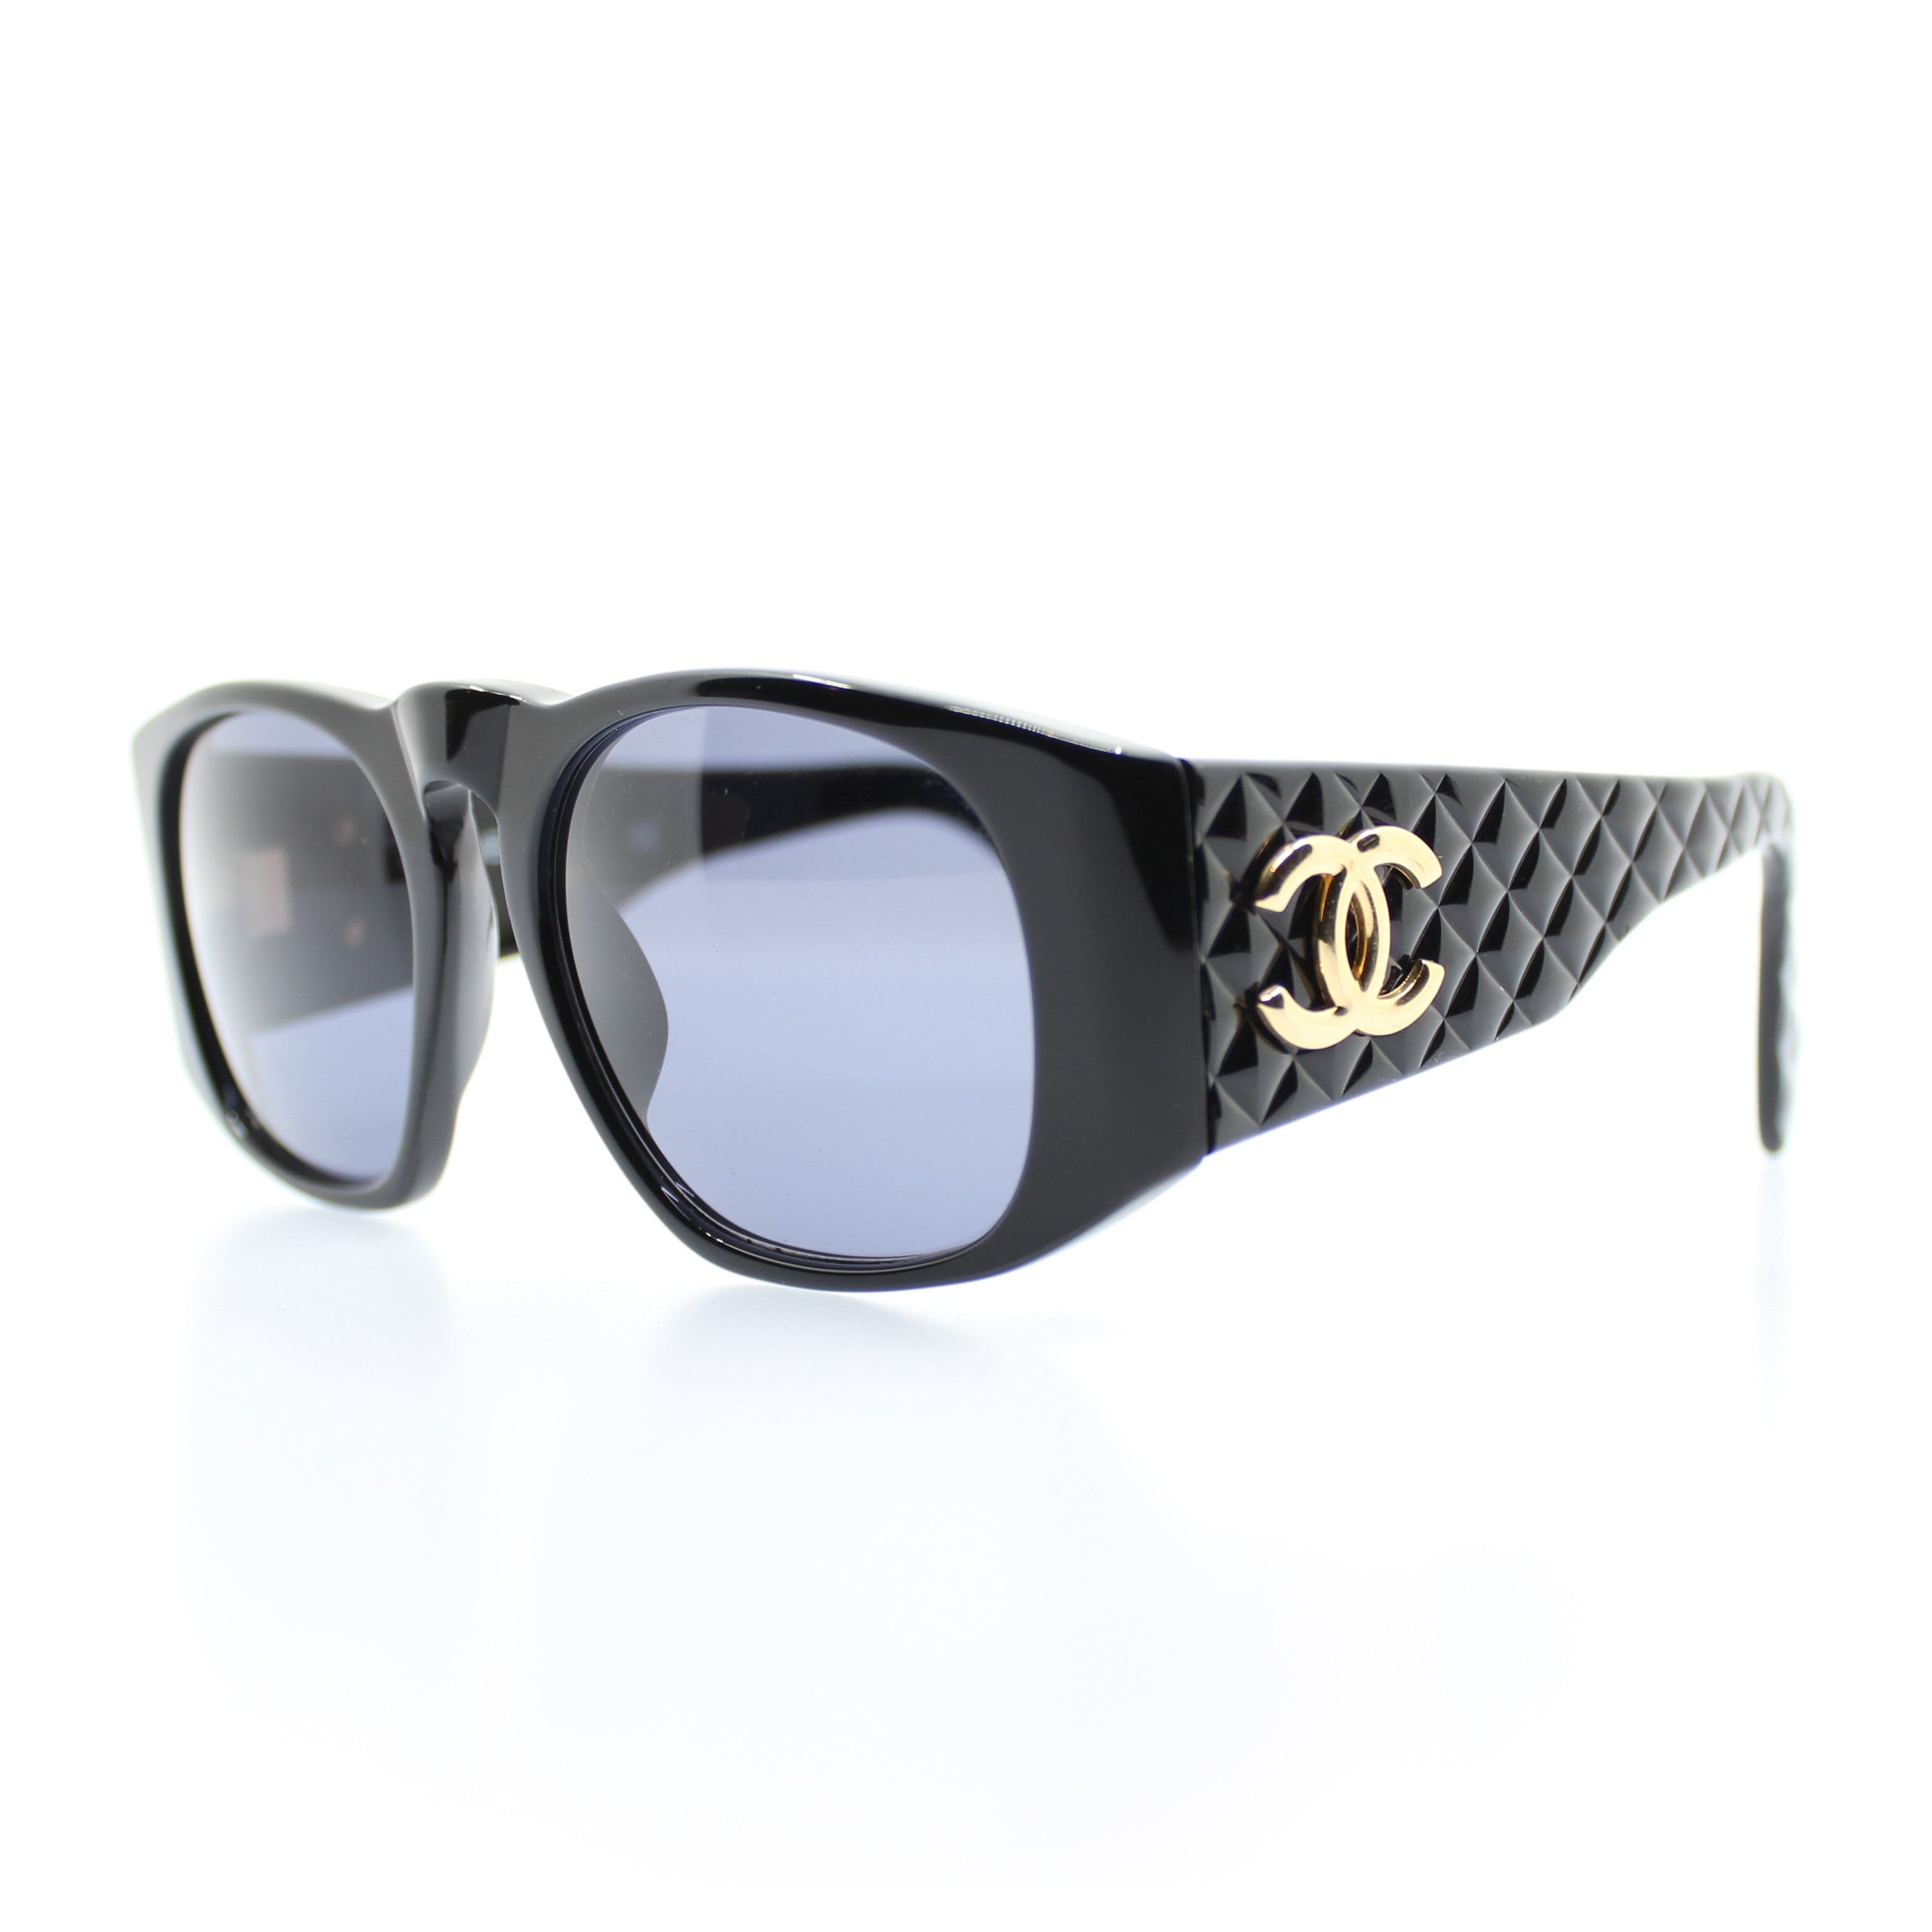 Auth CHANEL Vintage Gold CC Logo Black Sunglasses 01450 94305 Used from  Japan